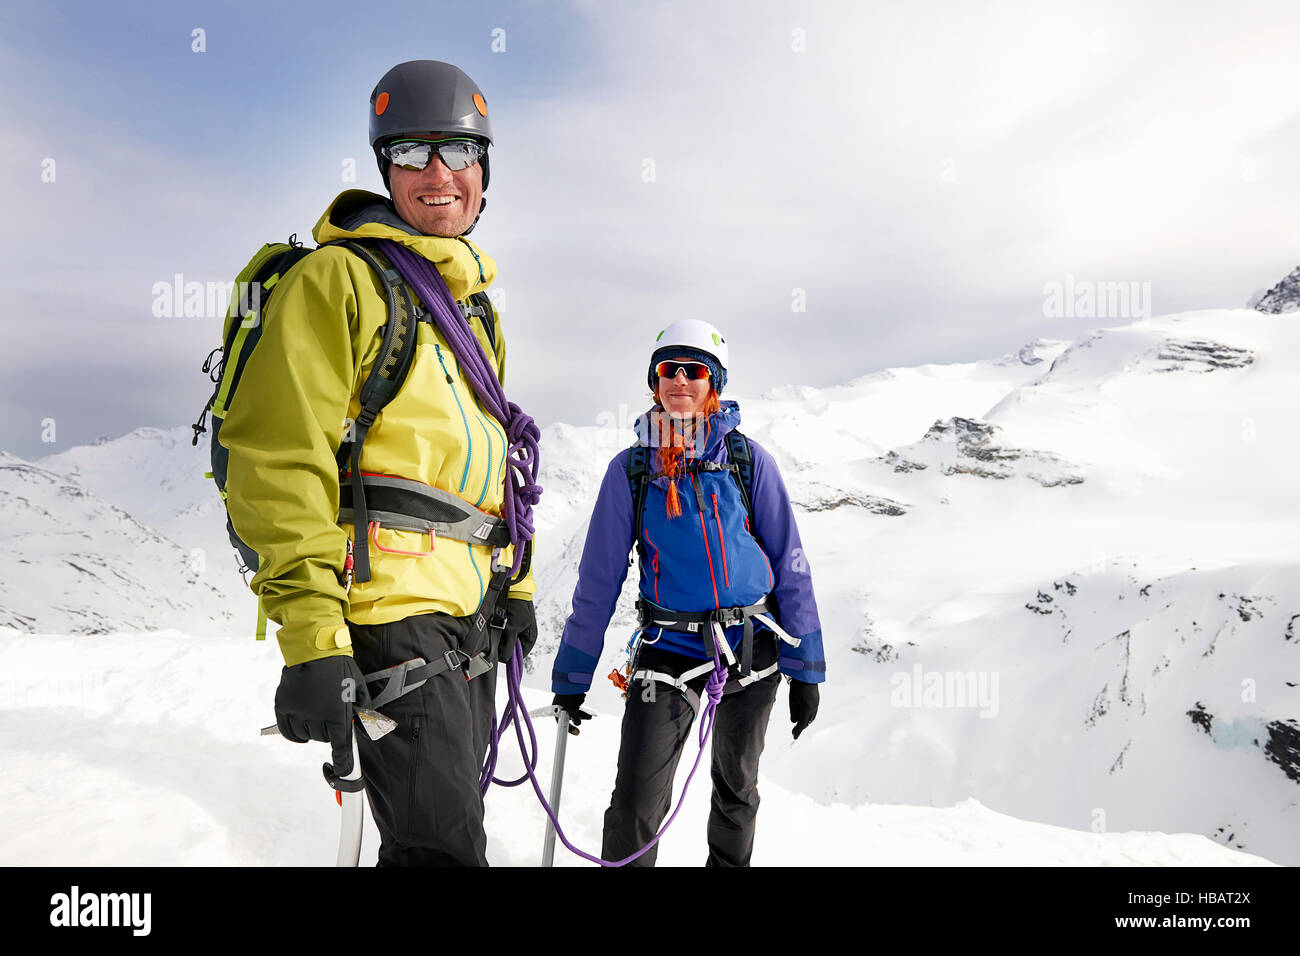 Mountaineers on snow-covered mountain looking at camera smiling, Saas Fee, Switzerland Stock Photo